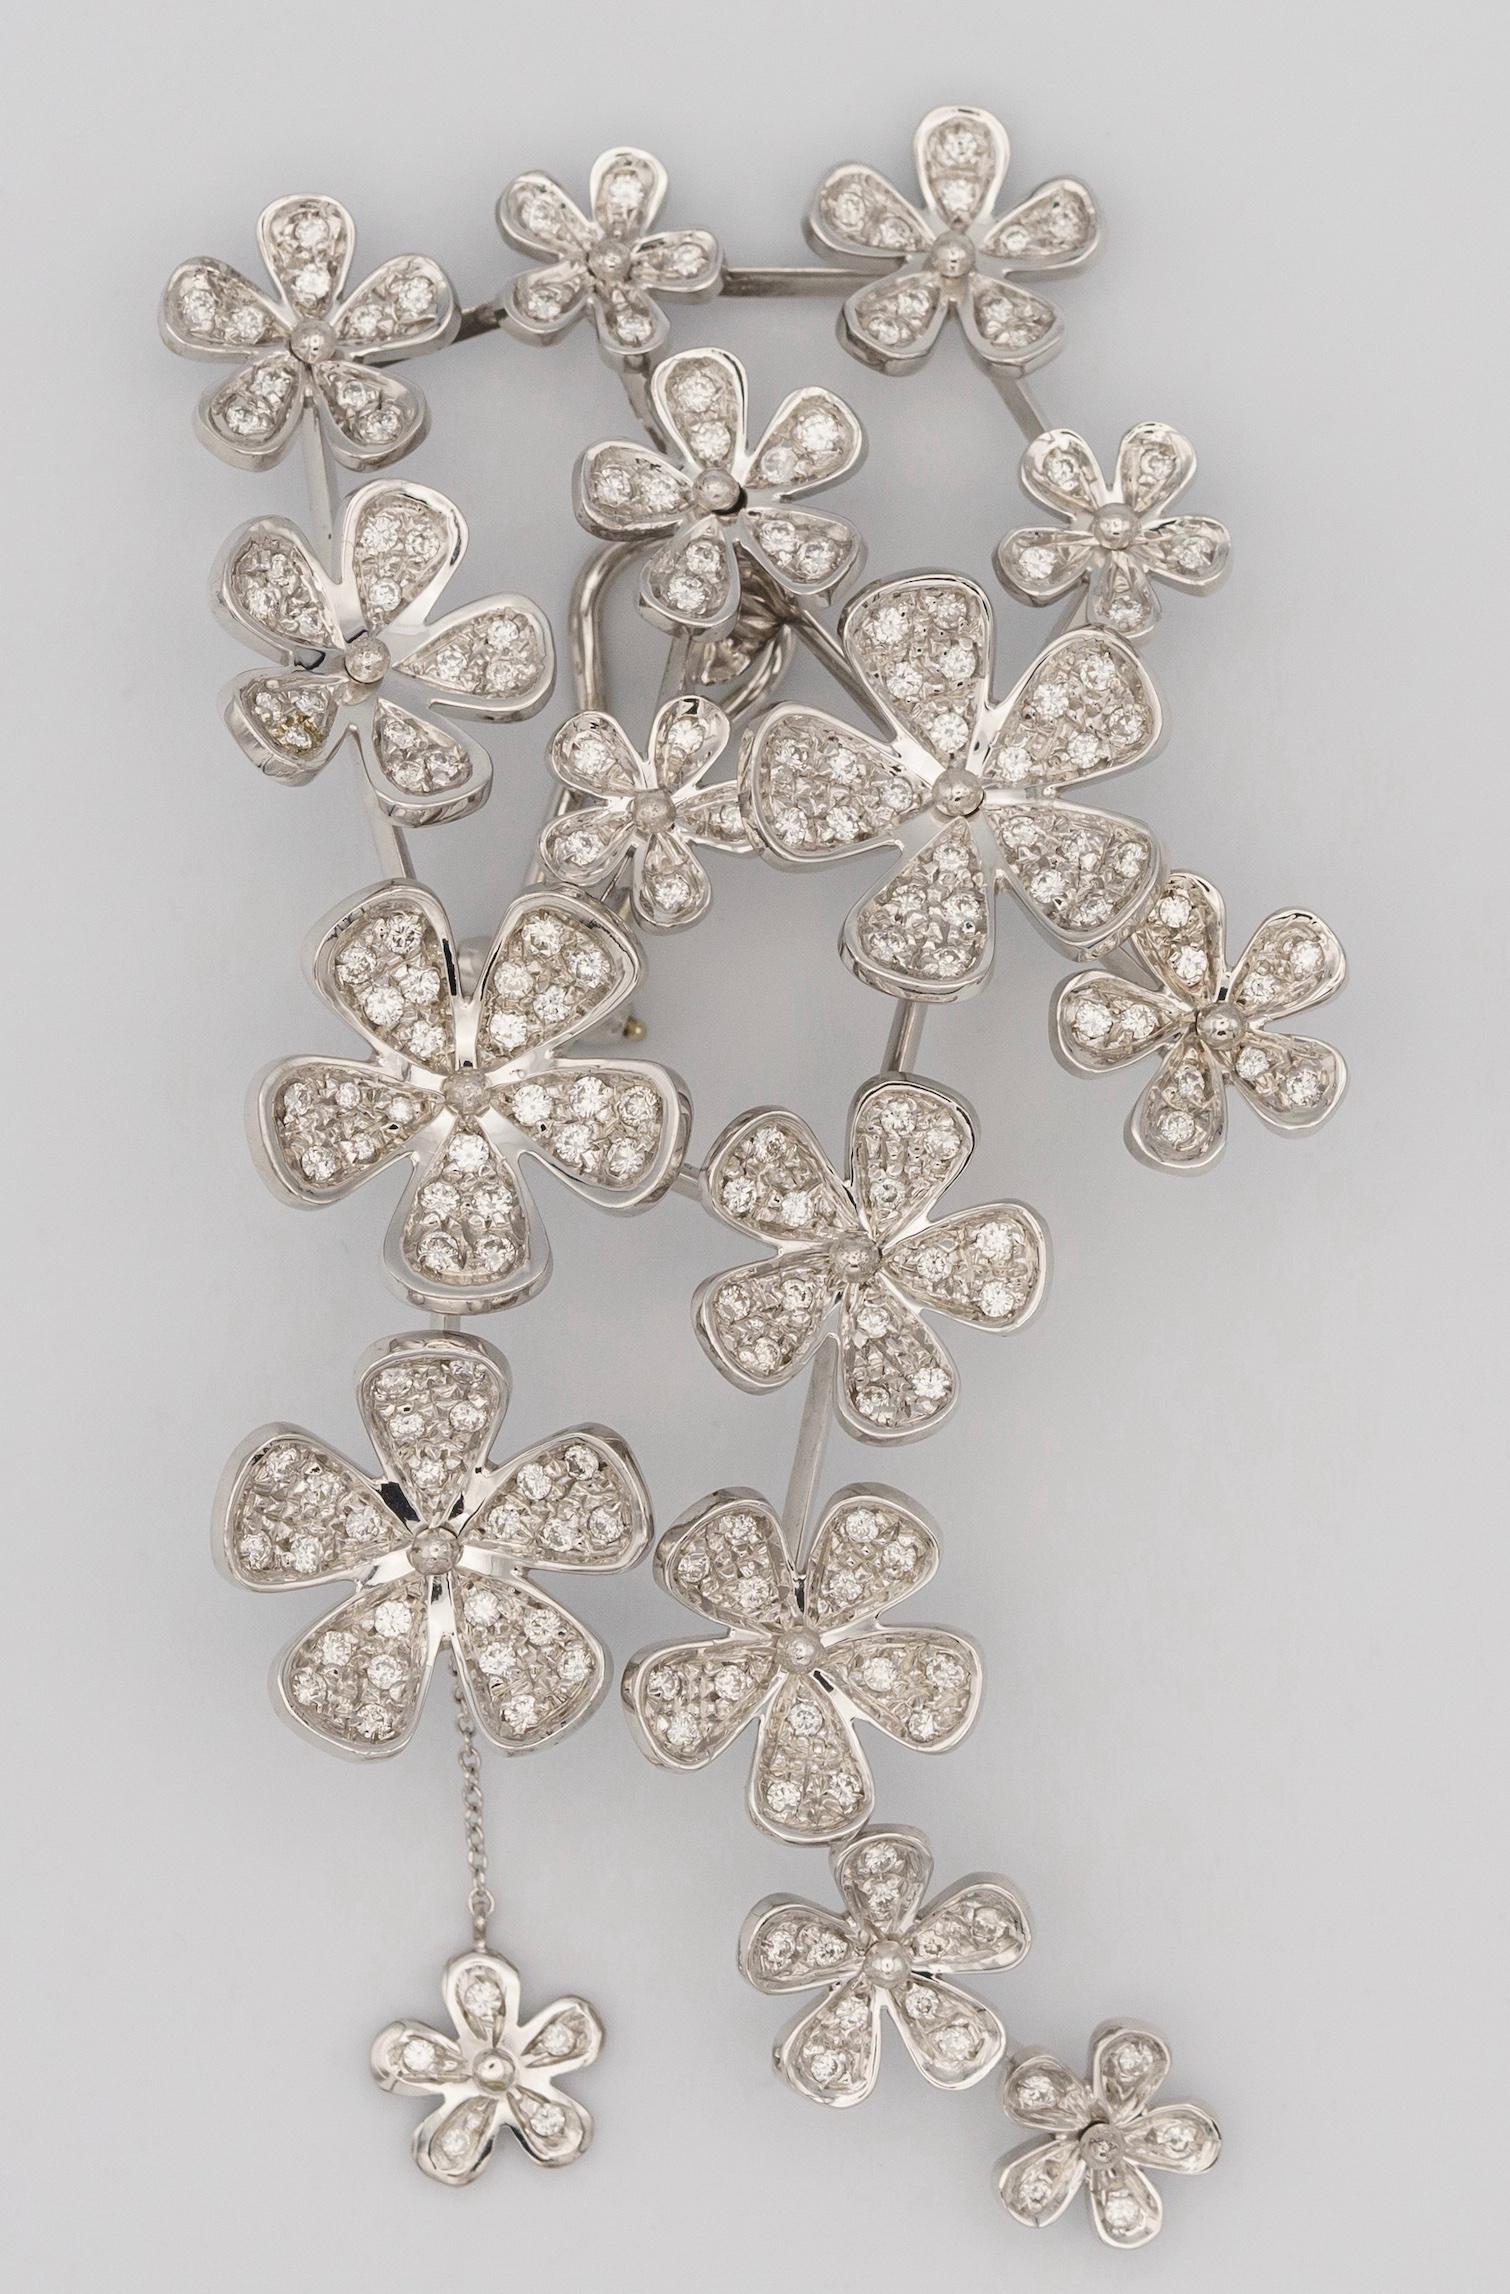 This magnificent pair of white gold flowers earrings paved with approximately 10 carats of diamonds has a design that makes them unique.
Some of the patterns are in relief and rotate to give movement to the design. Still in this search for movement,